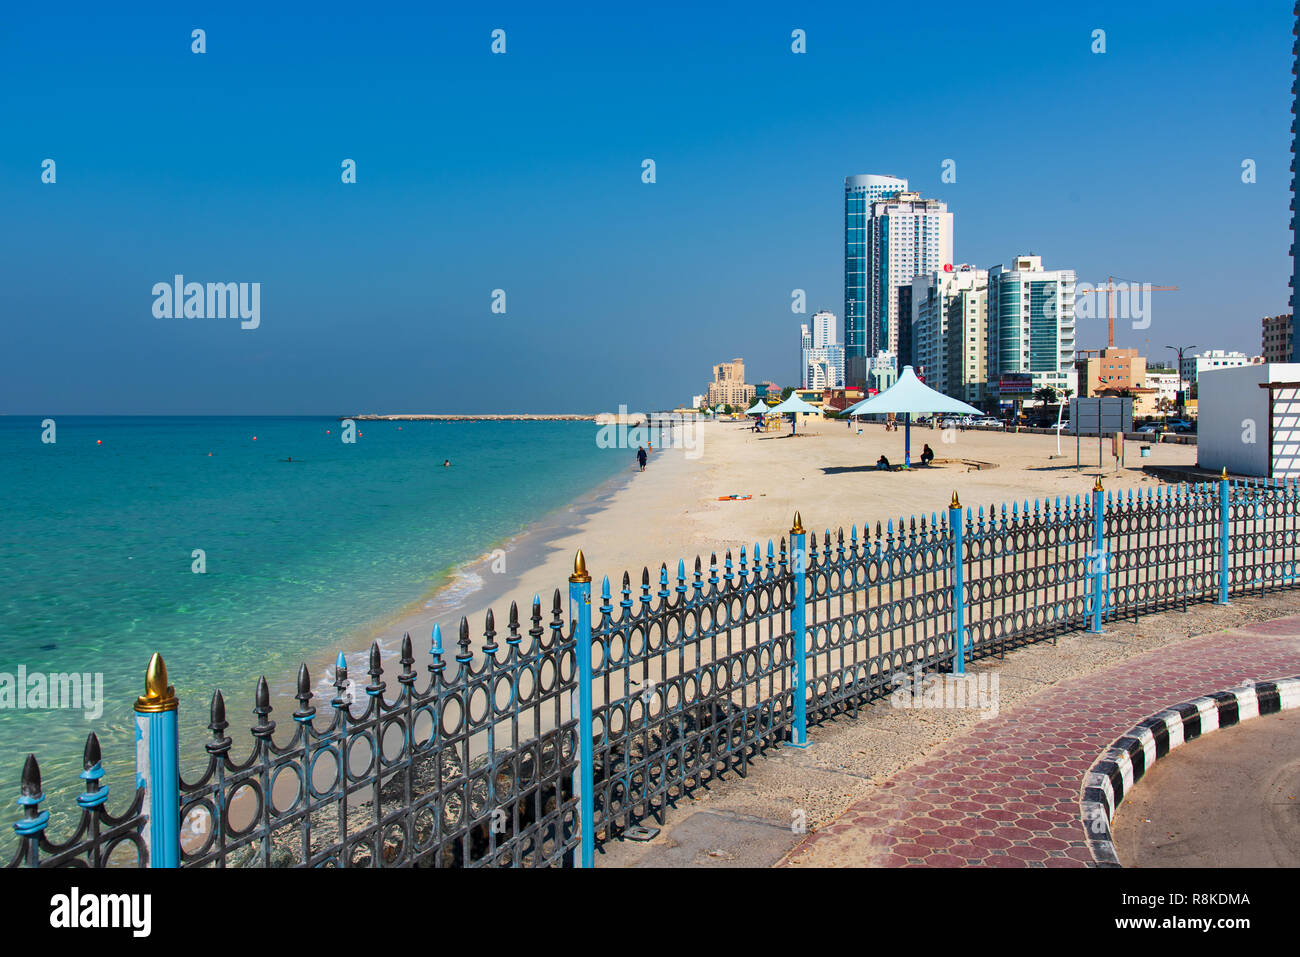 Ajman, United Arab Emirates - December 6, 2018: Ajman Corniche Beach  beautiful coast in the city downtown area surrounded by high residential  building Stock Photo - Alamy